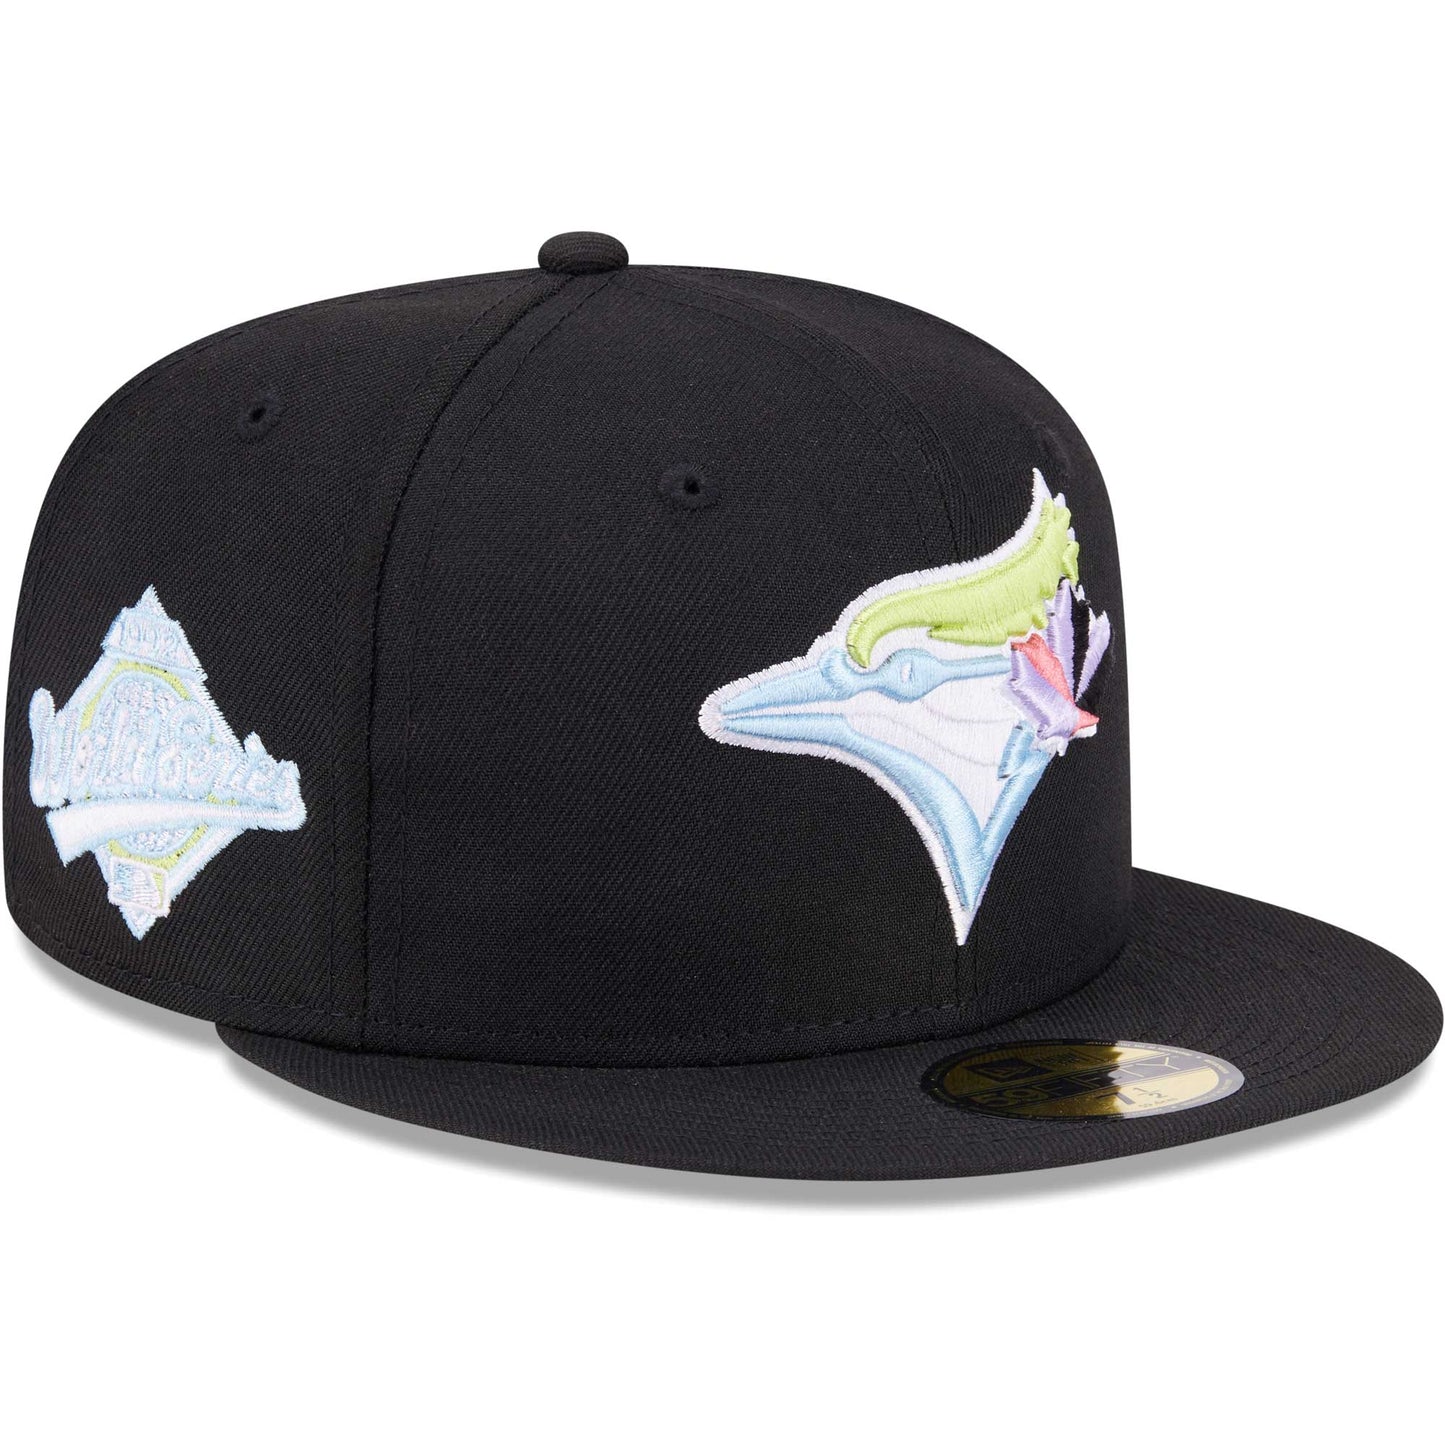 Toronto Blue Jays New Era Multi-Color Pack 59FIFTY Fitted Hat - Black